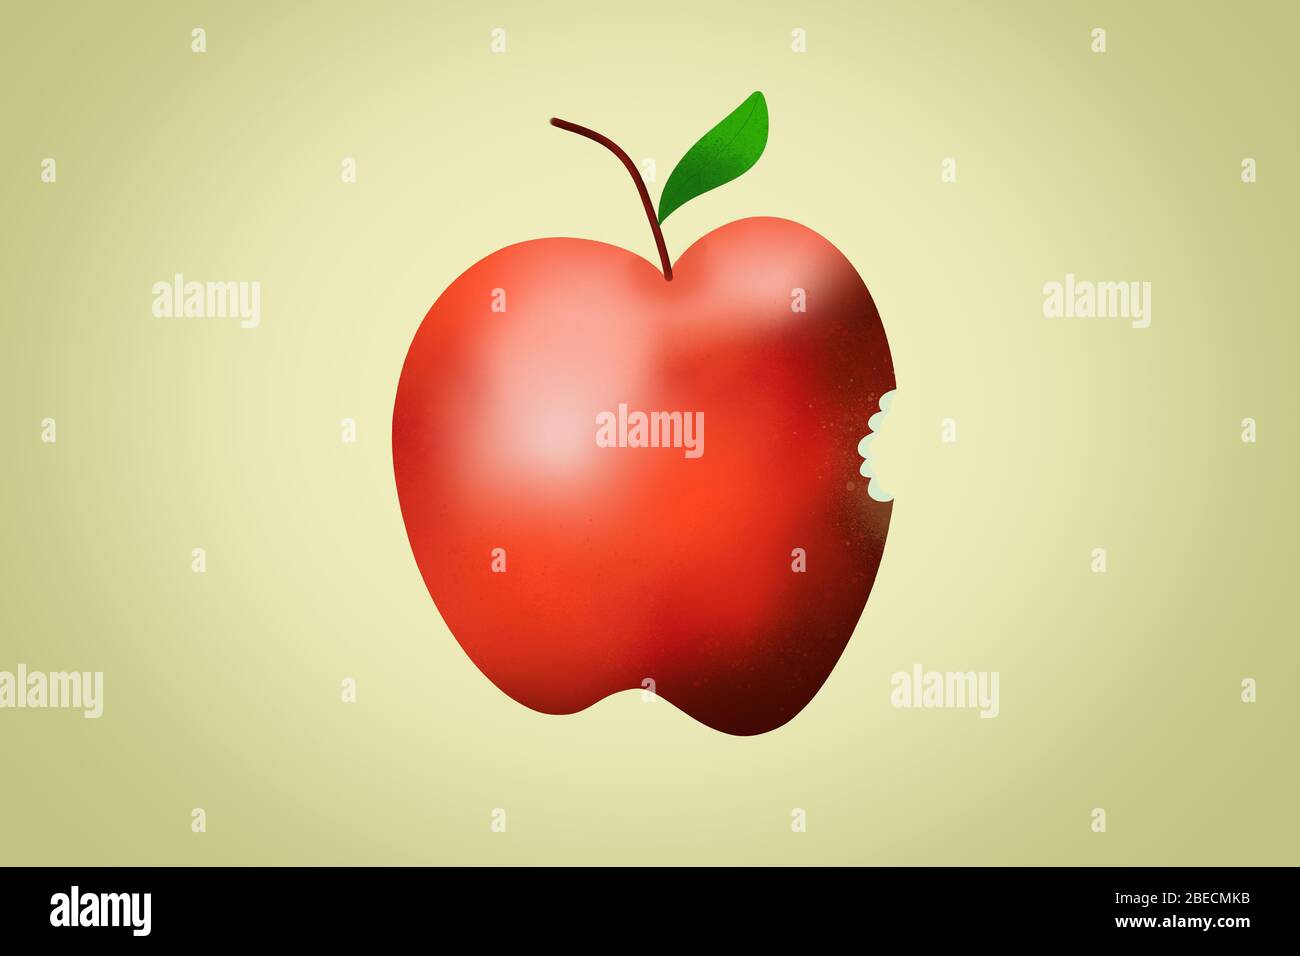 Illustration of a bite out of red apple isolated on brige background Stock Photo